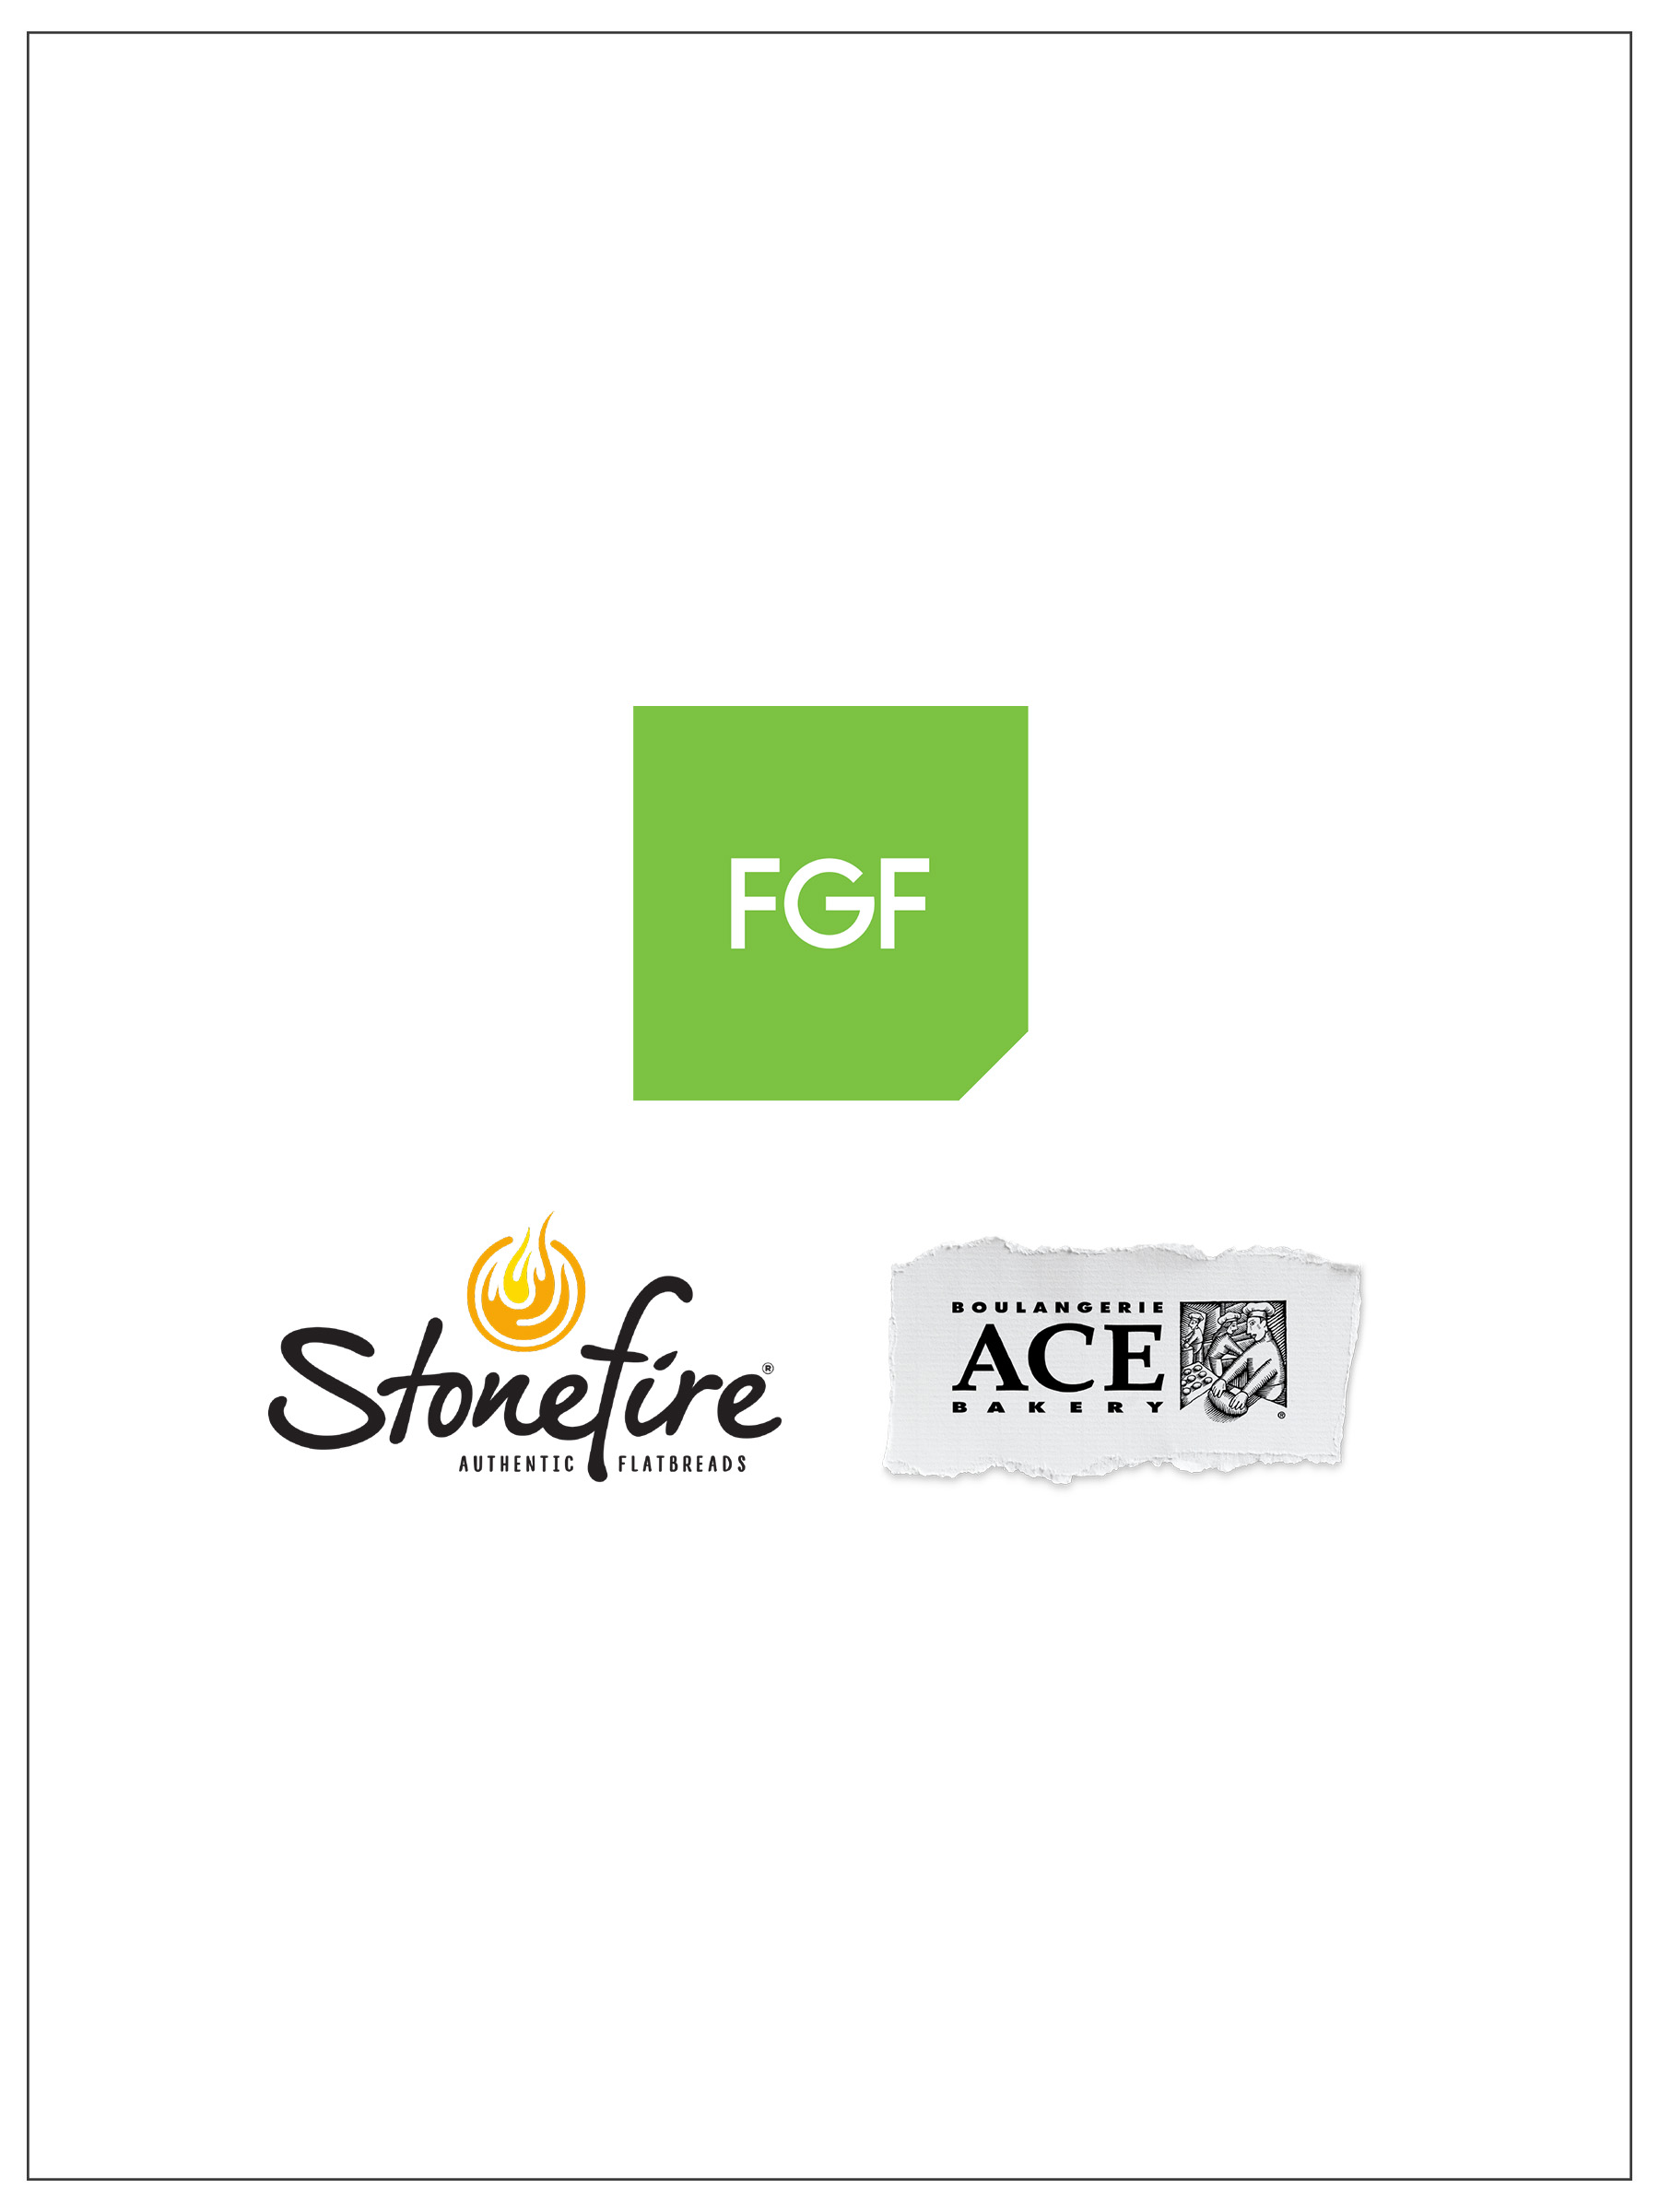 FGF Brands Ad